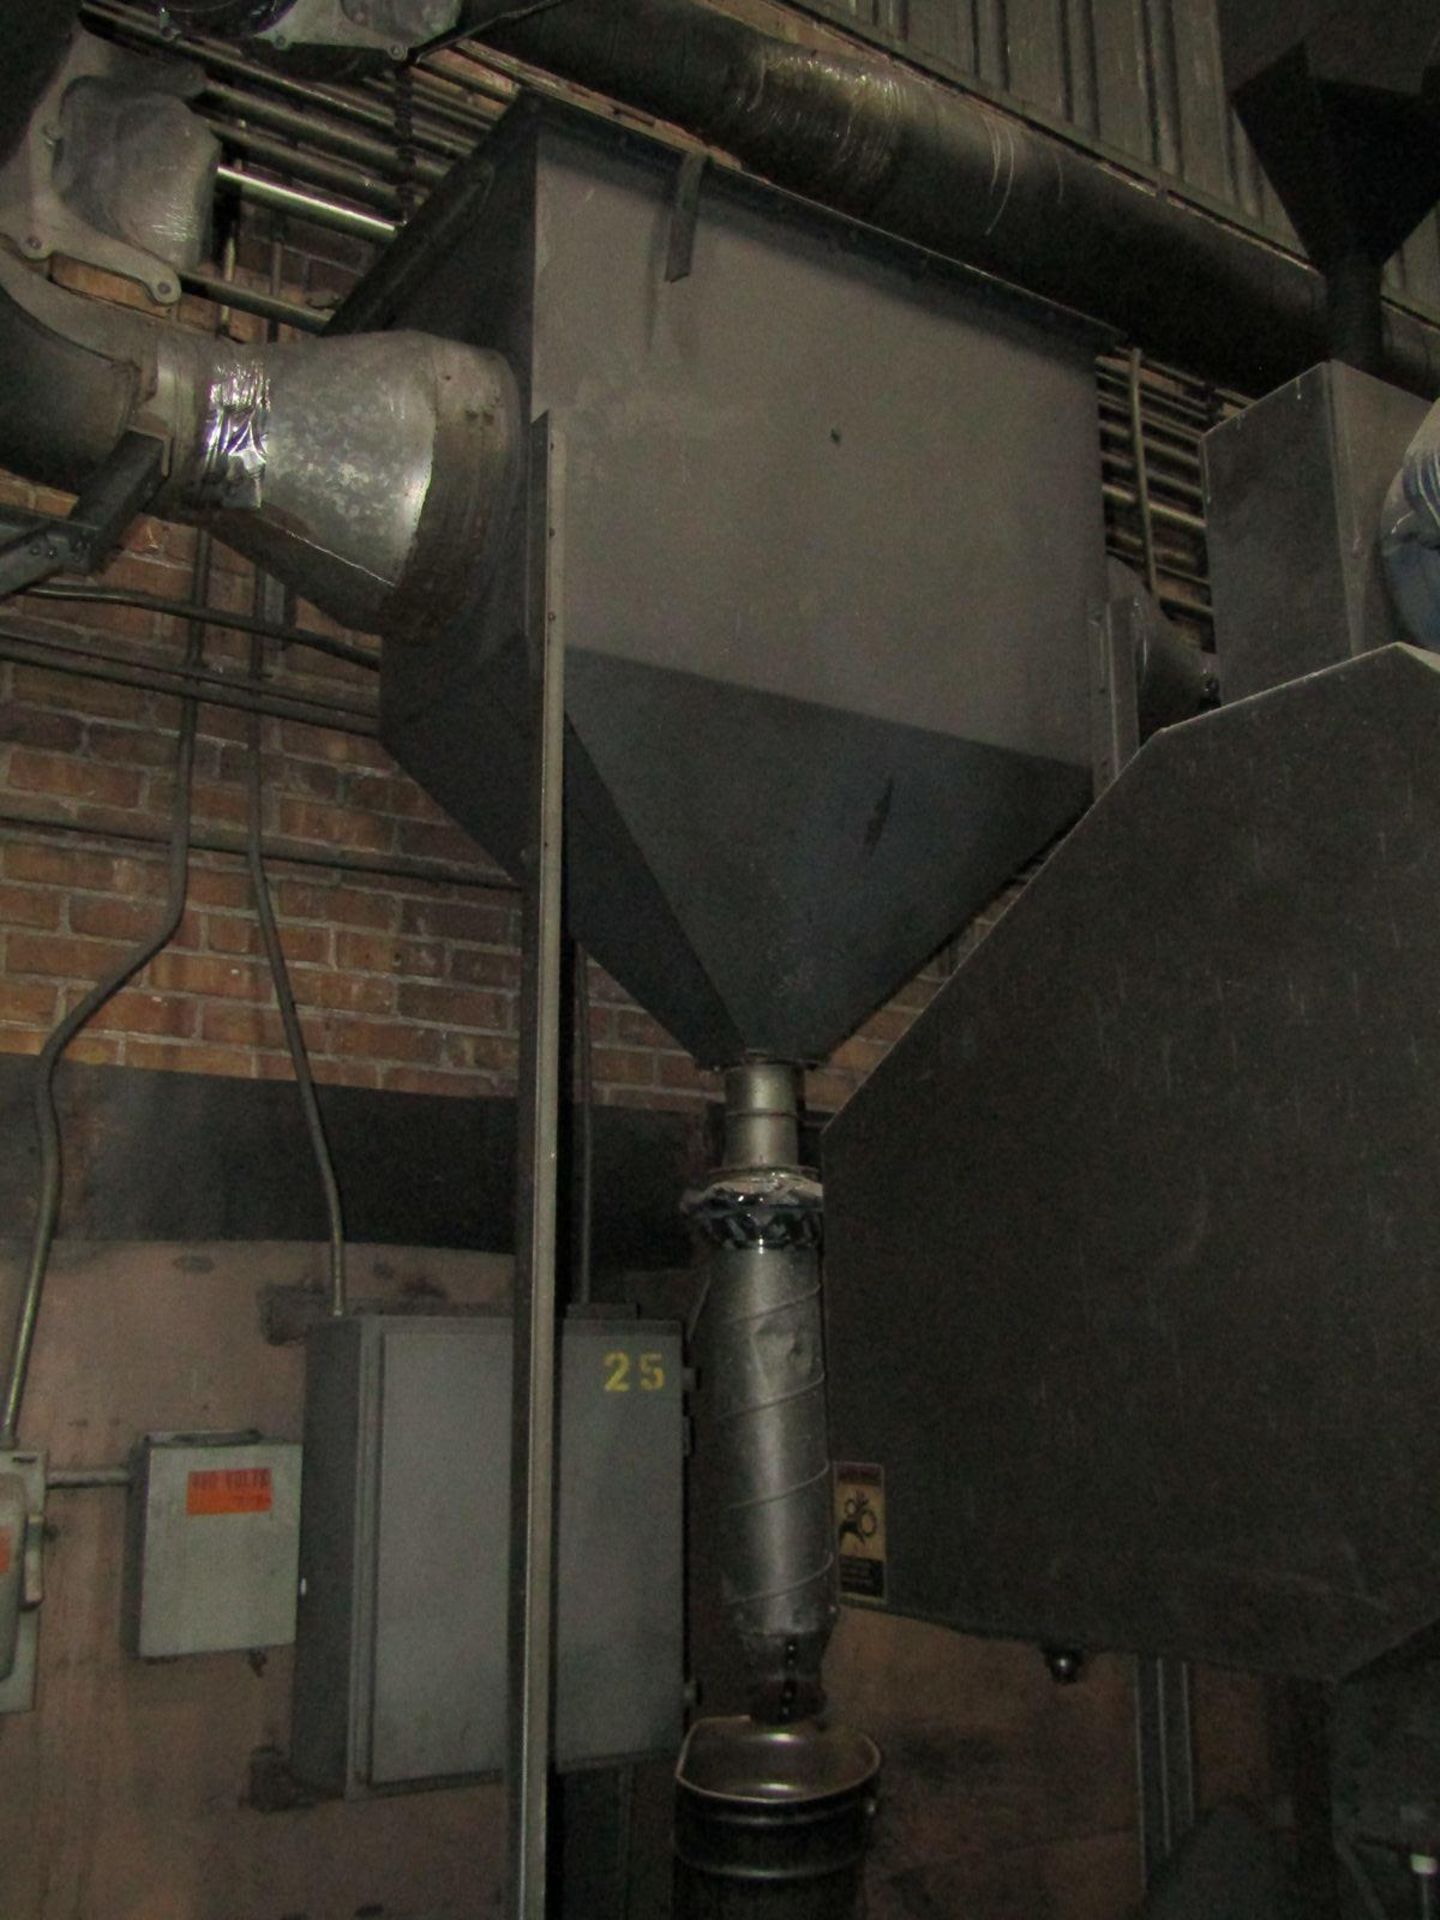 Wheelabrator 42 in. (approx.) Abrasive Tumblast Machine, S/N: A300231; with Tilting Load Hopper - Image 7 of 10